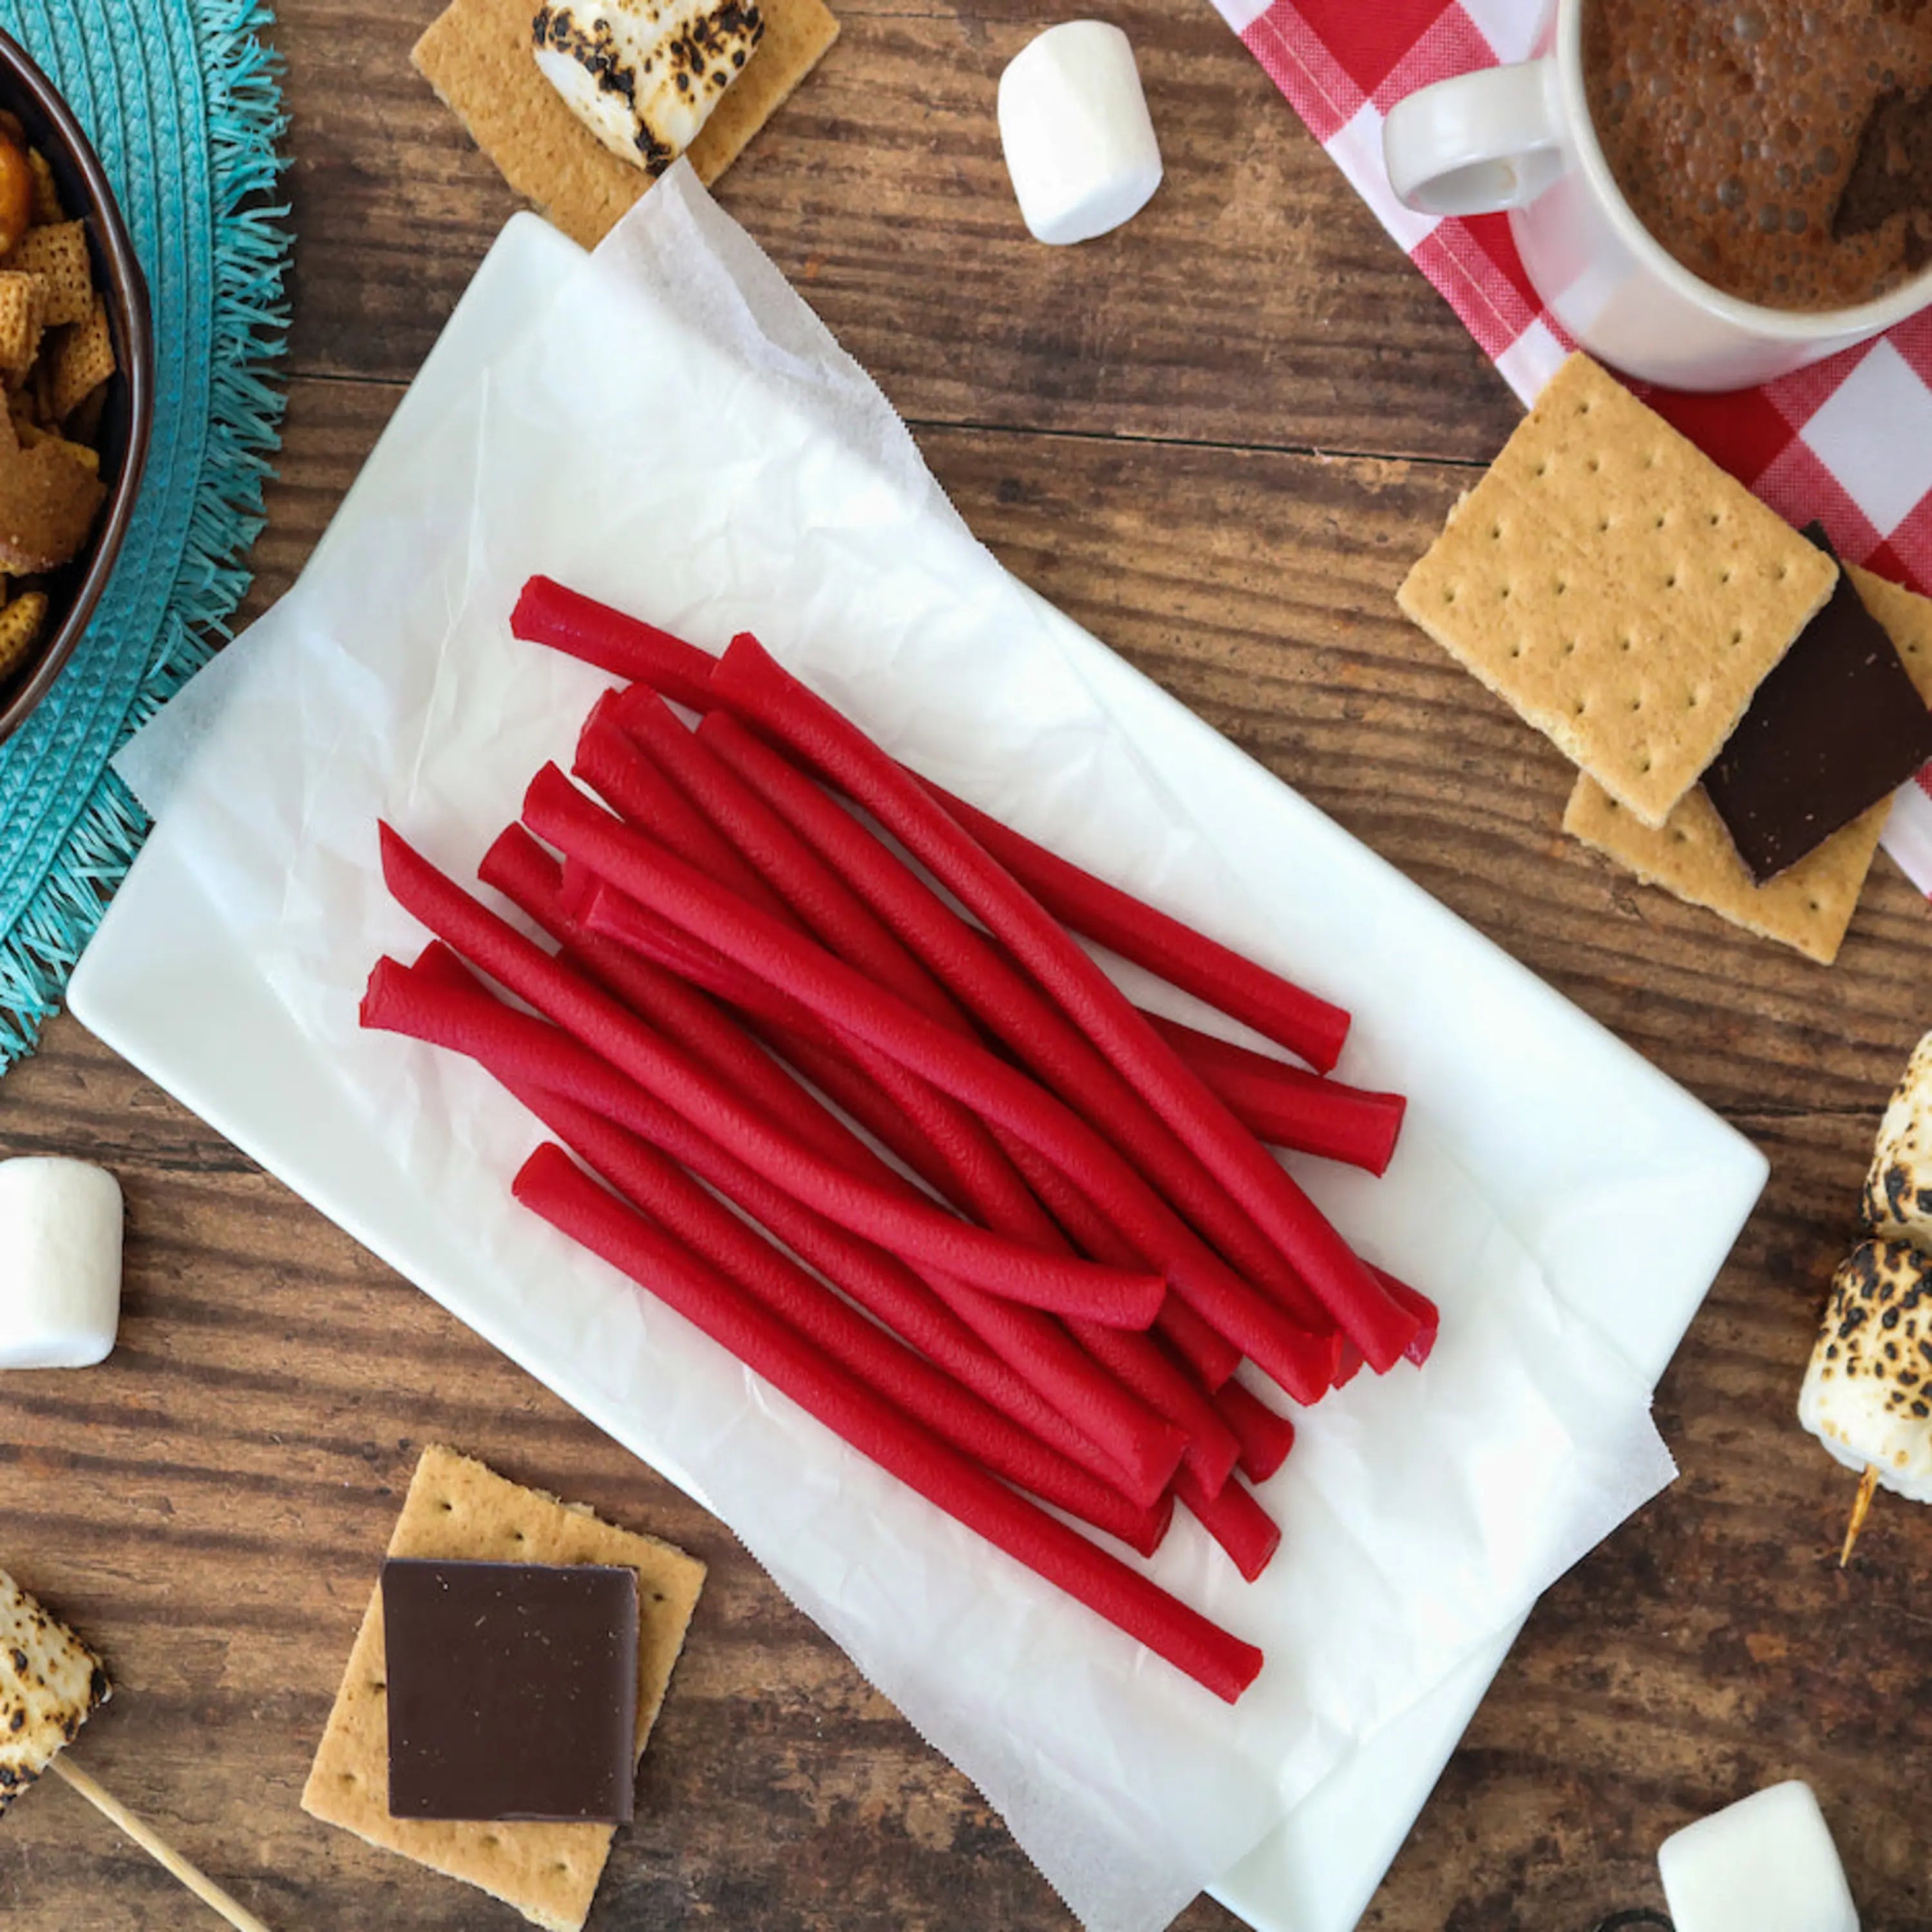 Red Vines Red Ropes Licorice Candy alongside s'mores supplies